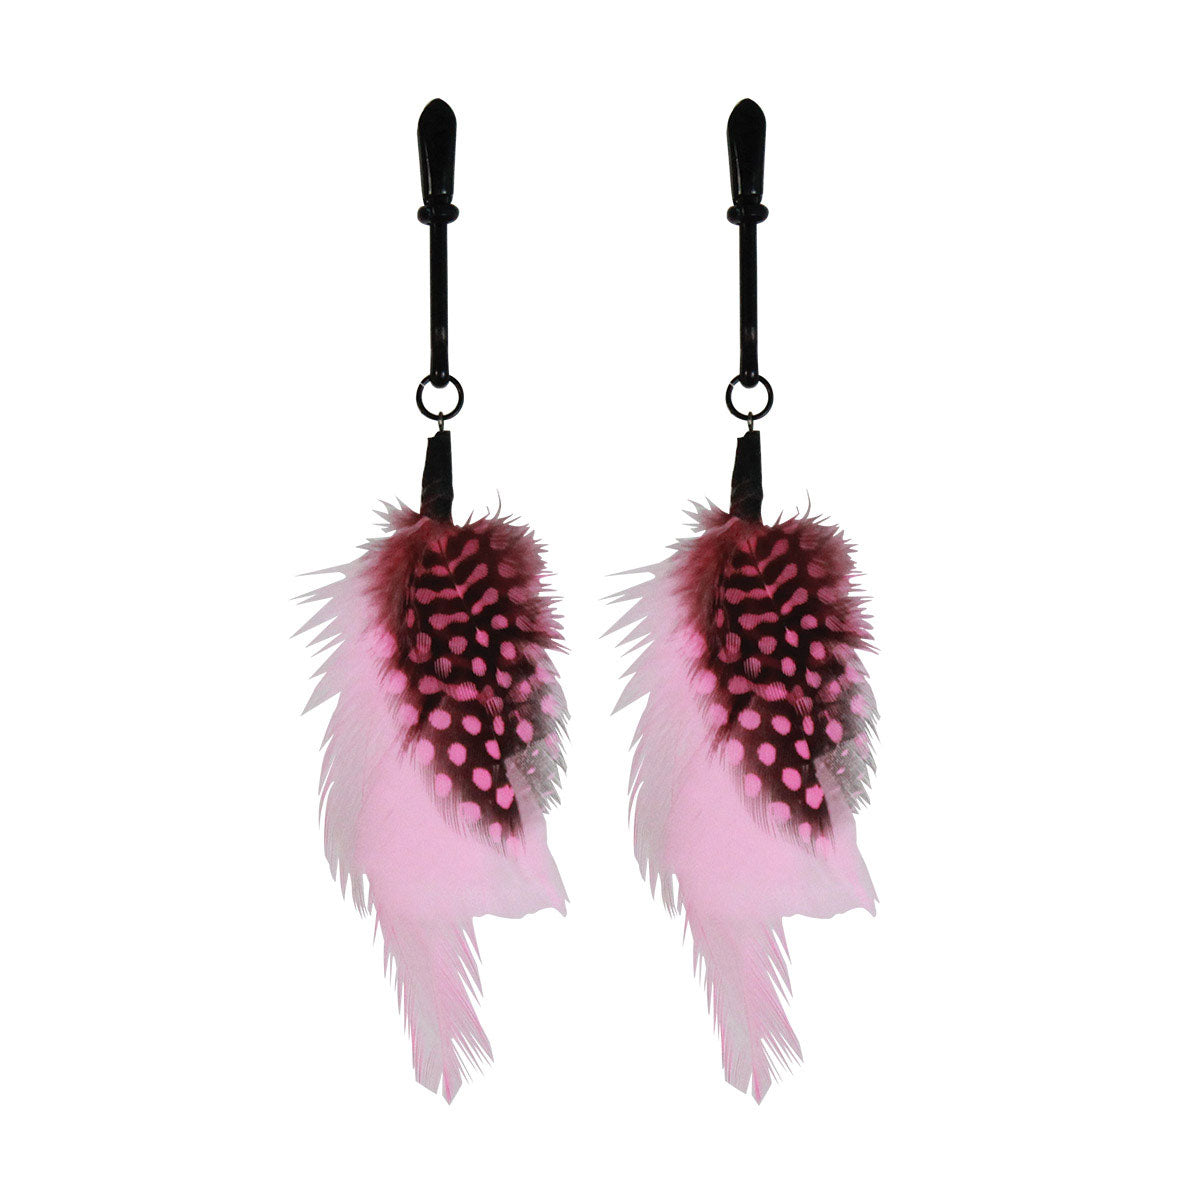 Sex Kitten Feather Clamps [A00556]